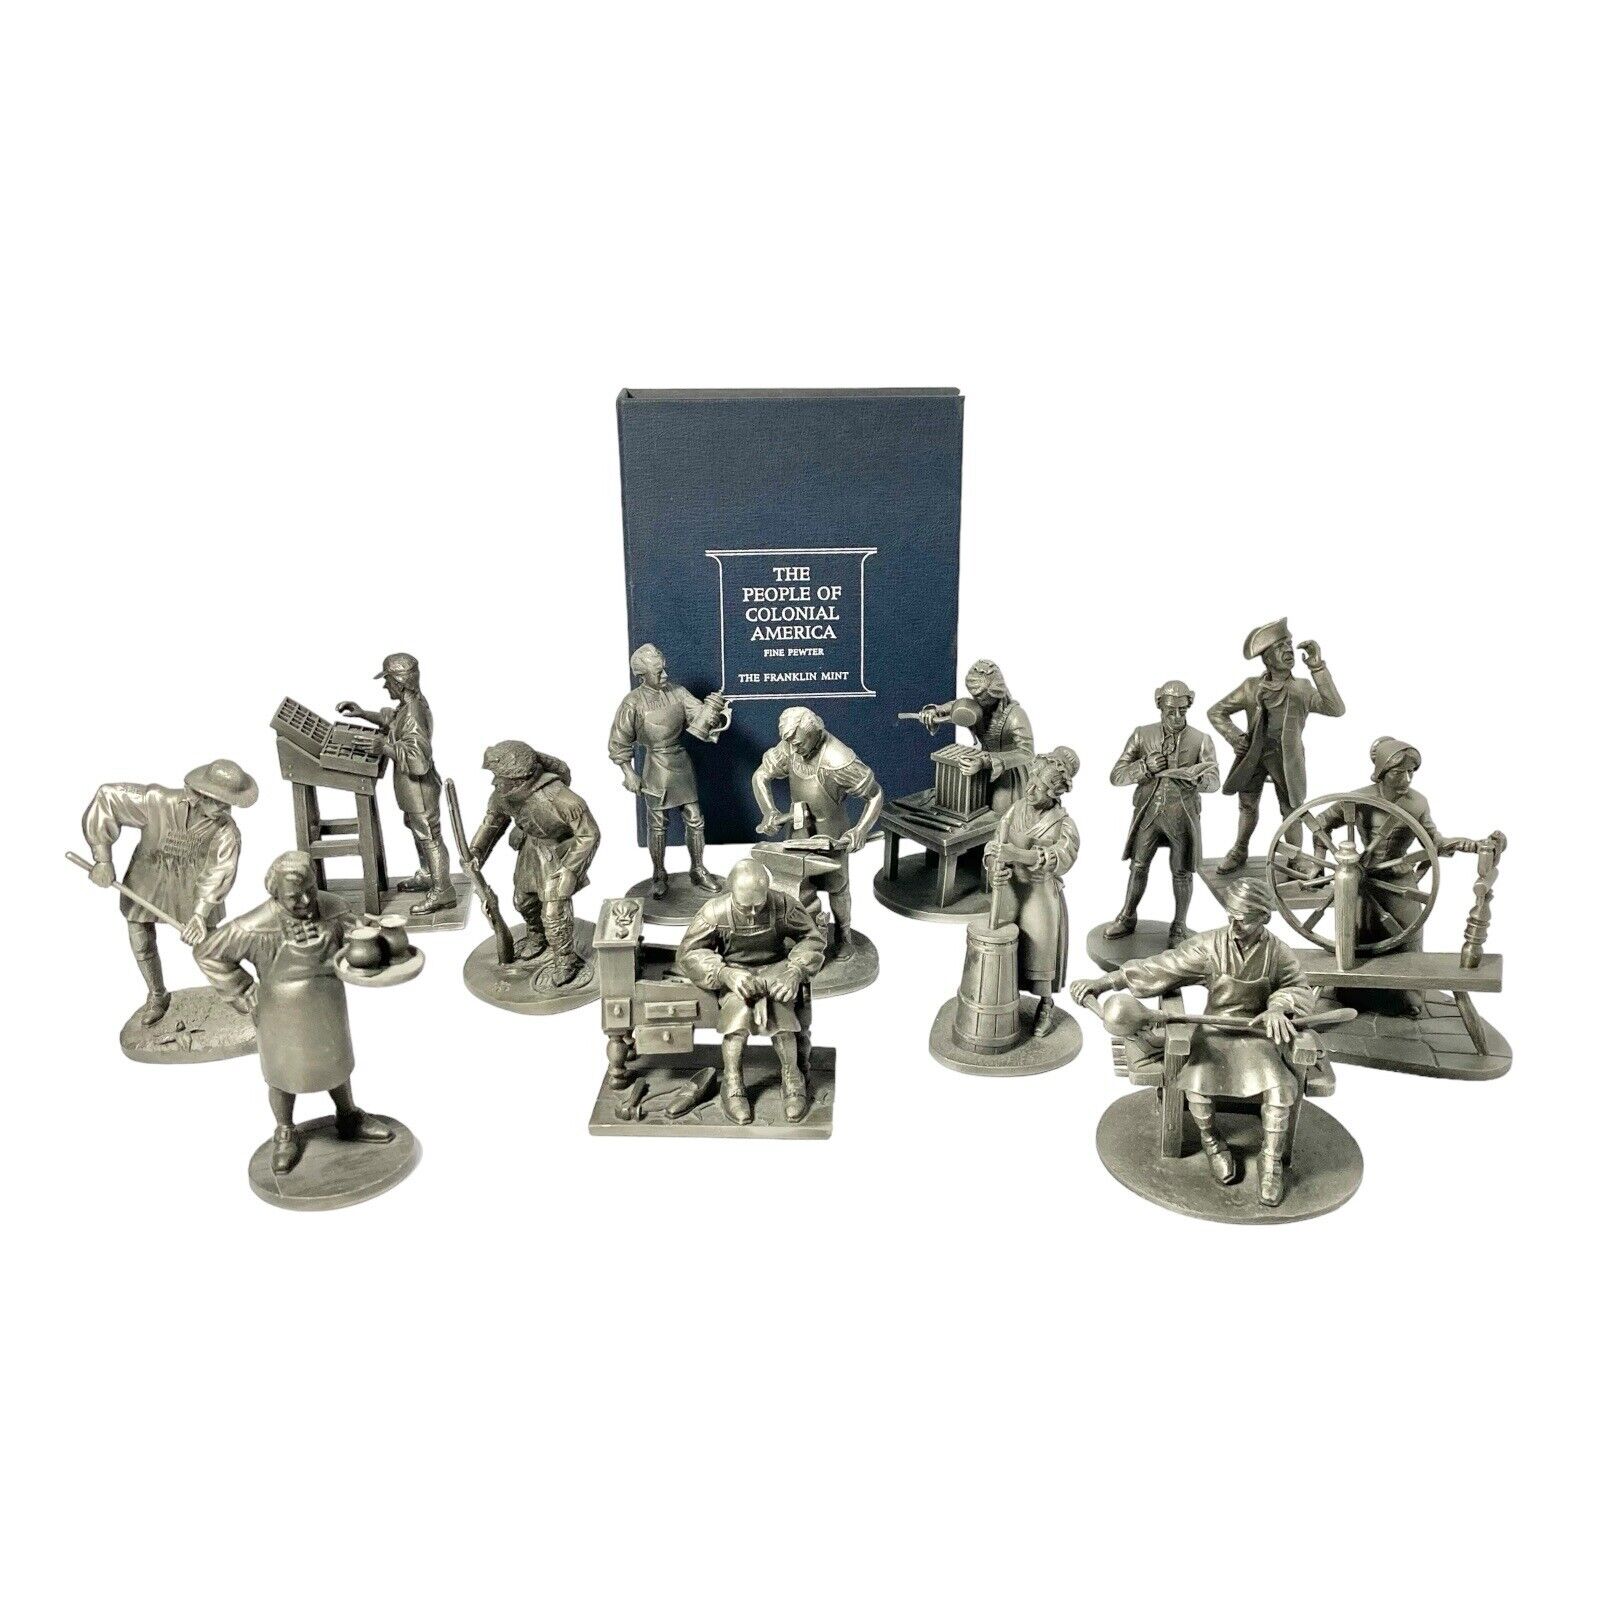 1970s Franklin Mint “People of Colonial America” Complete 13-Piece Pewter Set